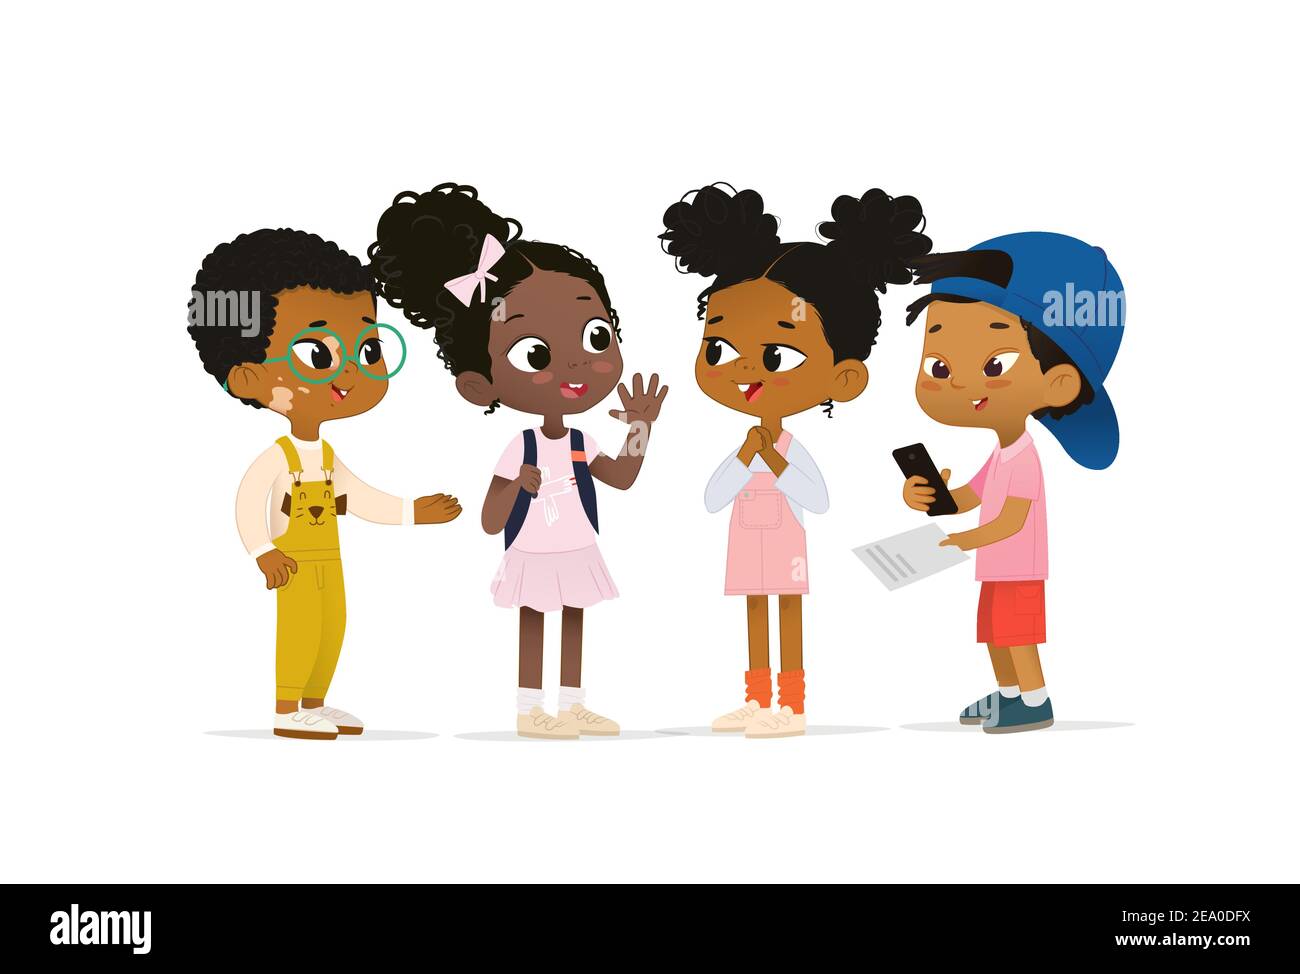 Group of African American children talk to each other. School boy with vitiligo say hello to new friends. Asian boy scan QR code. School friends have Stock Vector